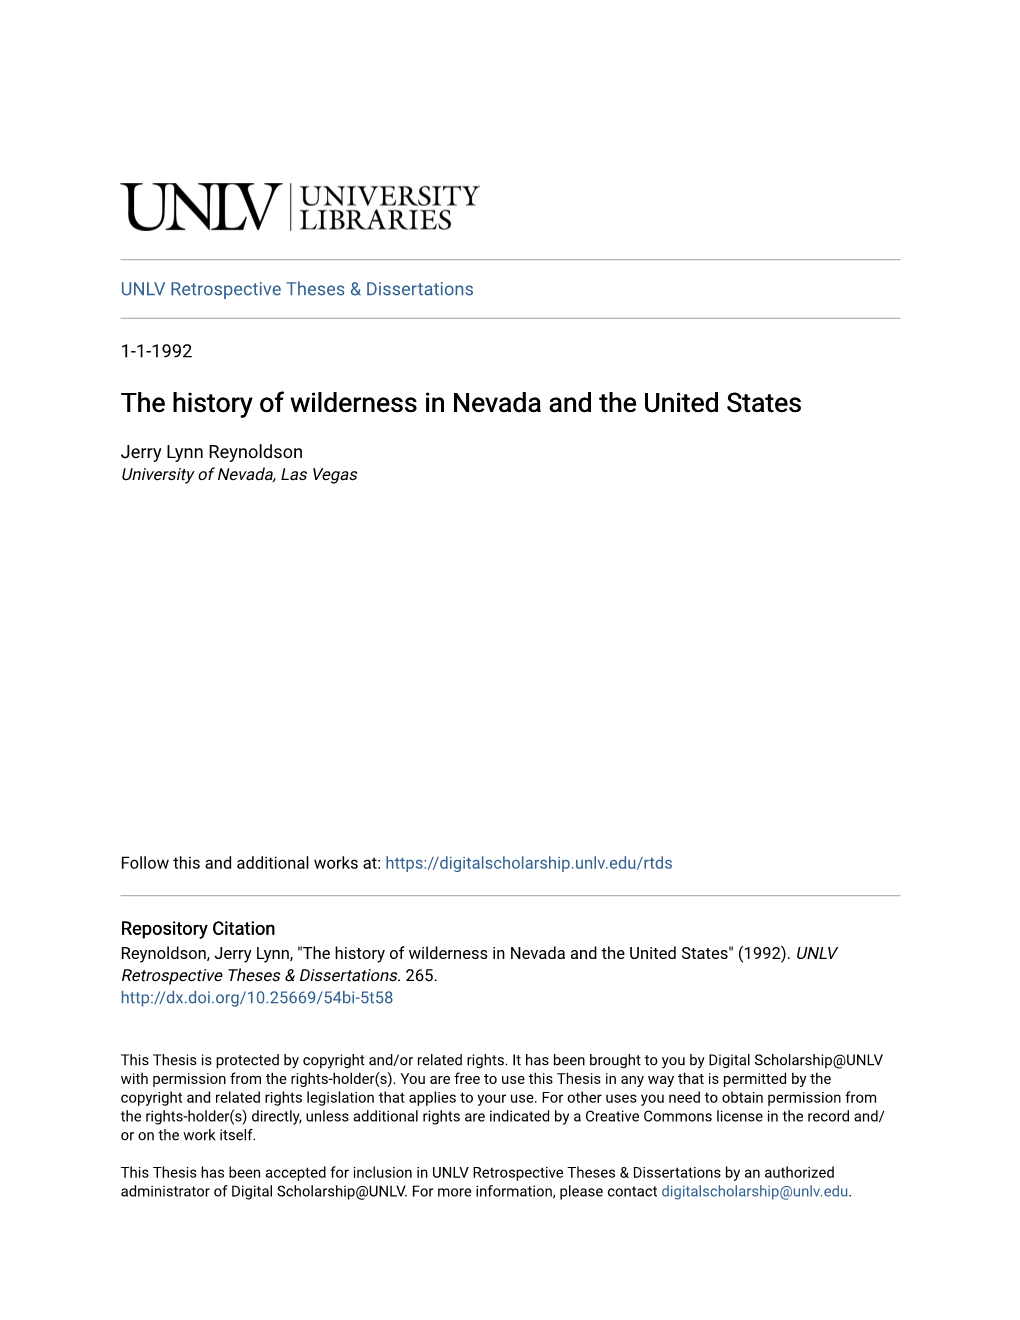 The History of Wilderness in Nevada and the United States